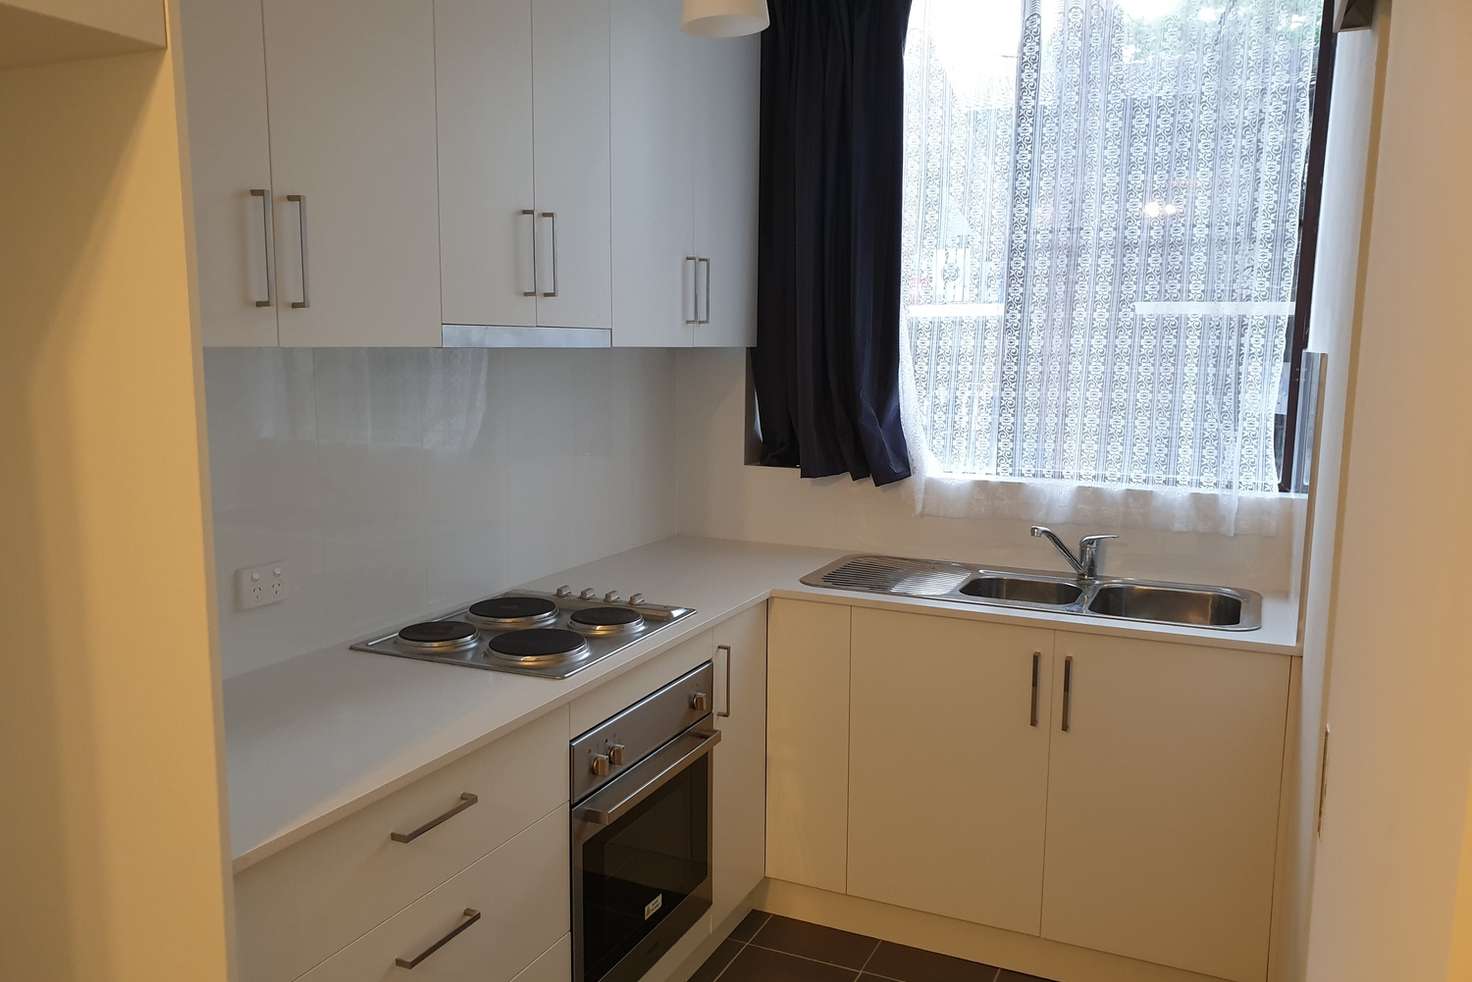 Main view of Homely apartment listing, 4/168 Greenacre Rd, Bankstown NSW 2200